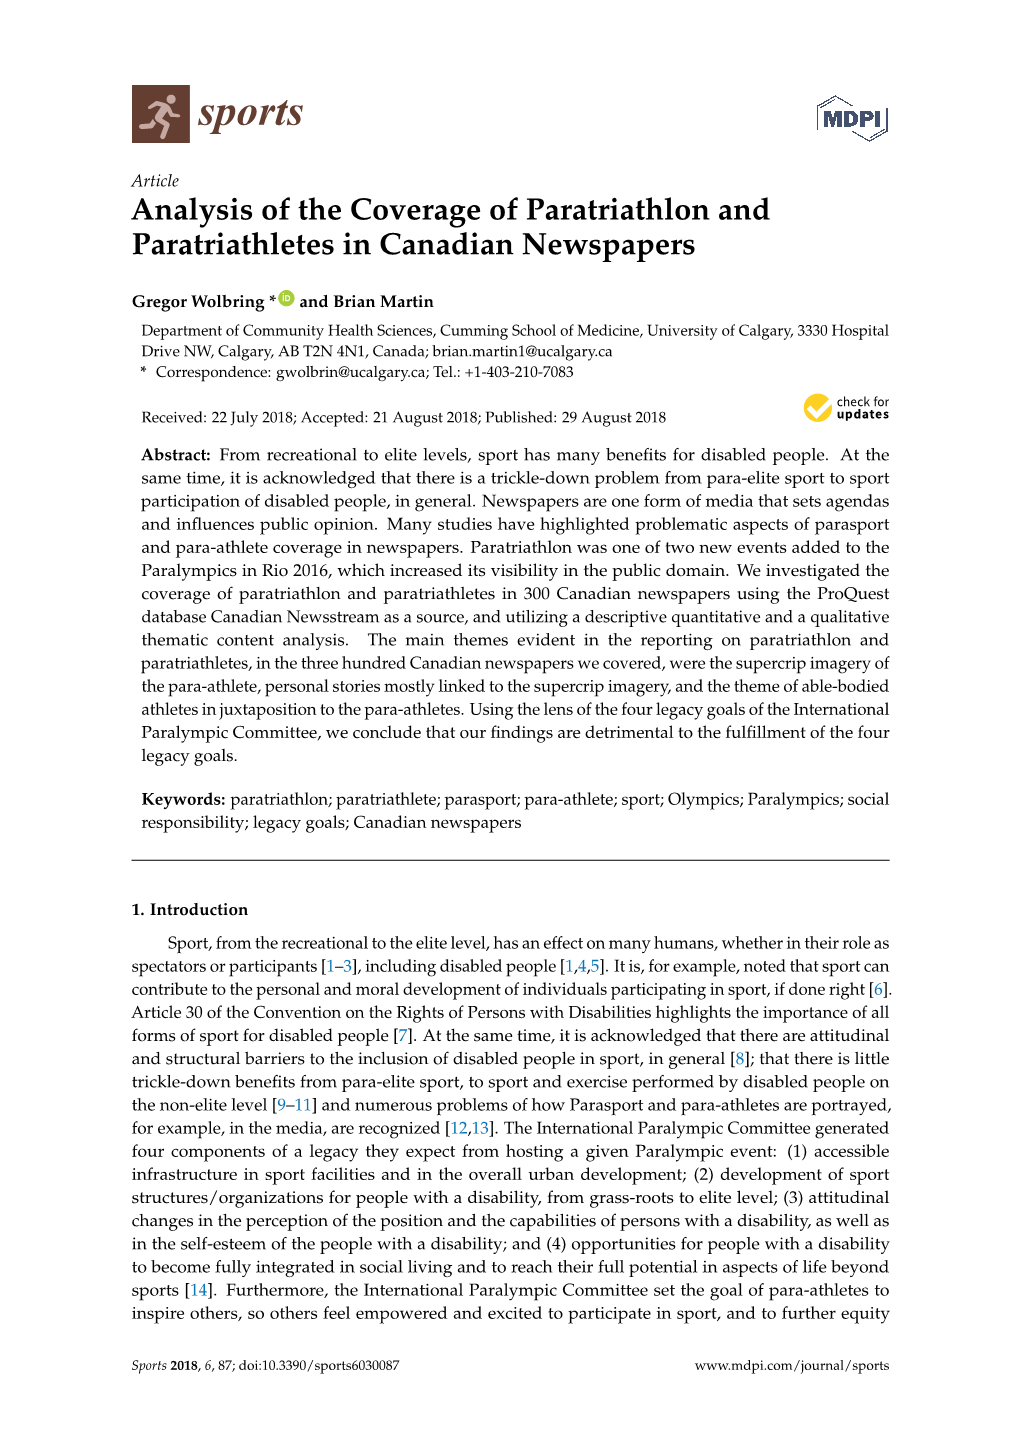 Analysis of the Coverage of Paratriathlon and Paratriathletes in Canadian Newspapers